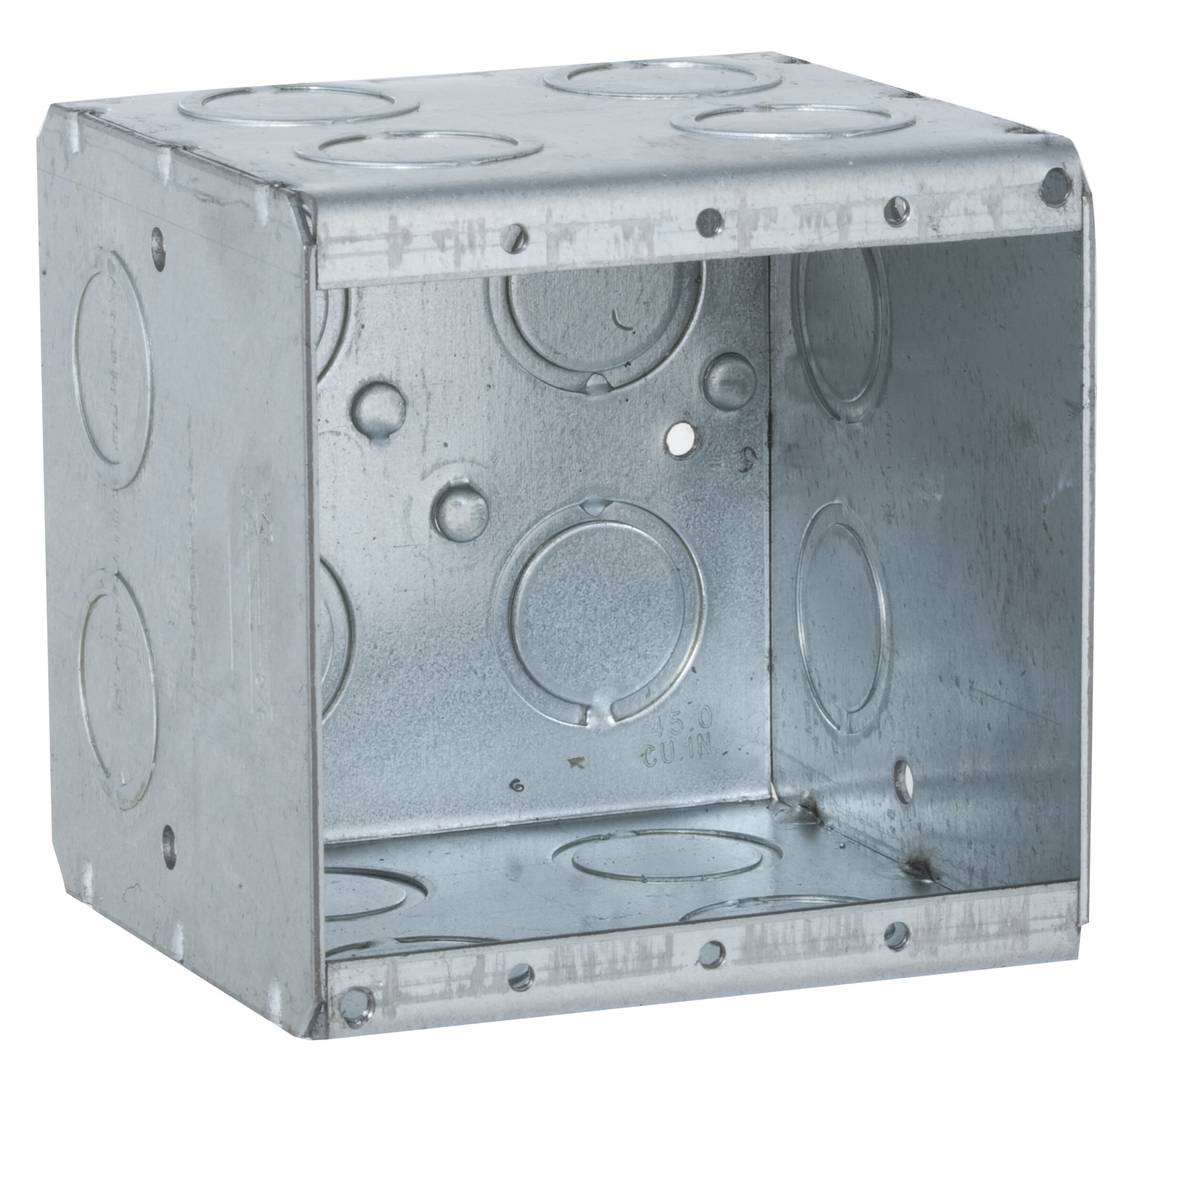 RACO® 696 Non-Gangable Masonry Box, Steel, 45 cu-in Capacity, 2 Gangs, 2 Outlets, 24 Knockouts